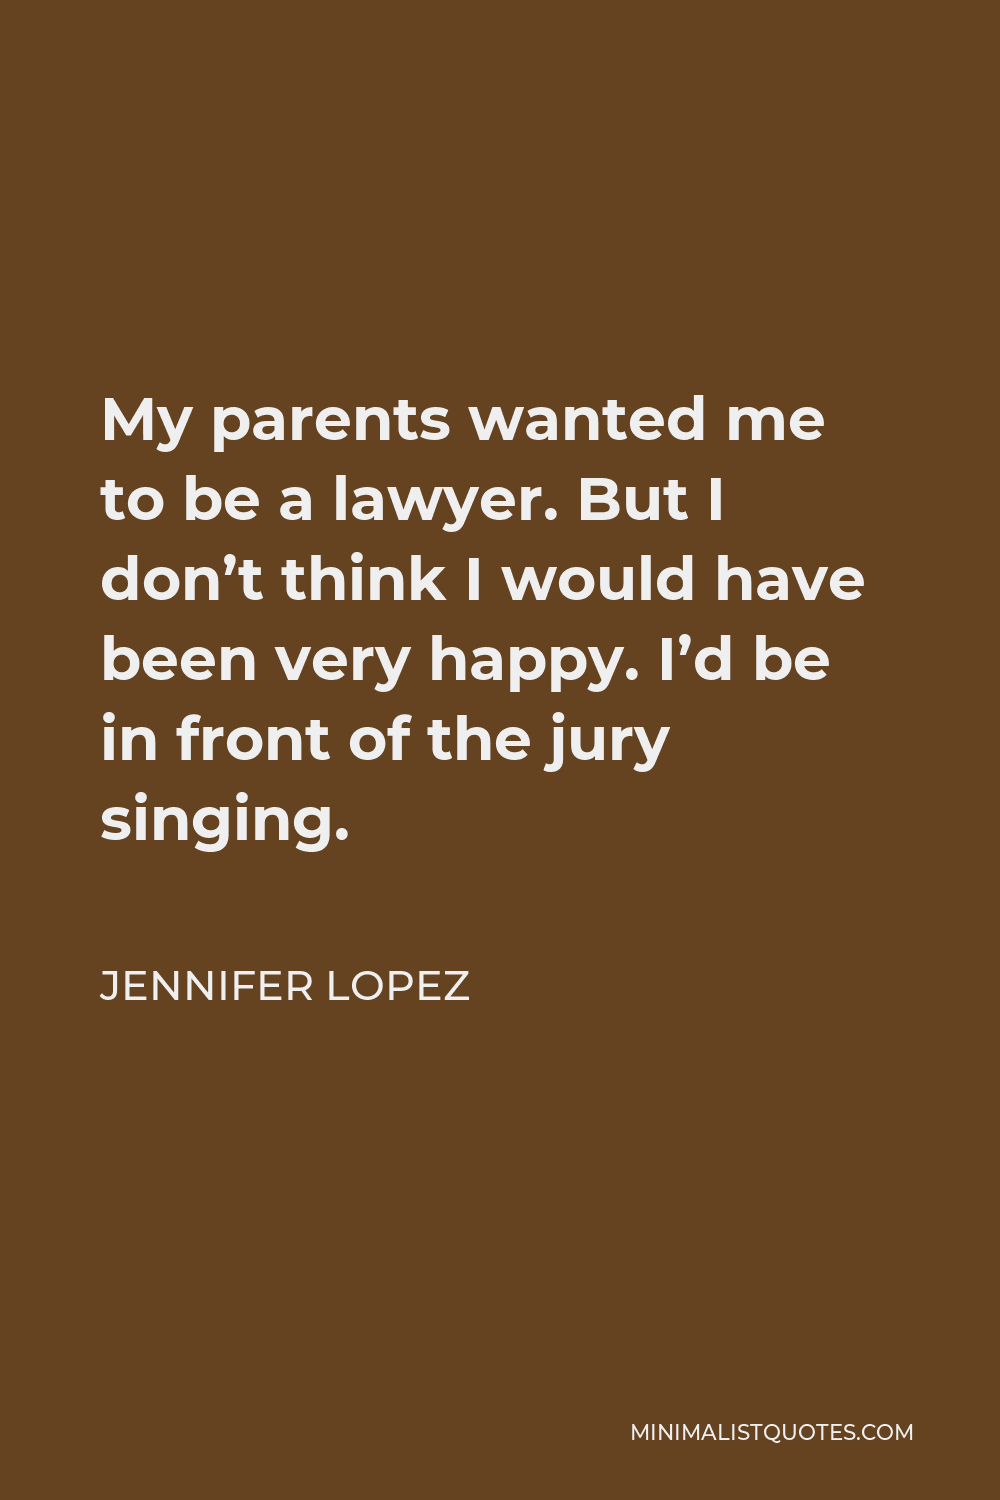 Jennifer Lopez Quote - My parents wanted me to be a lawyer. But I don’t think I would have been very happy. I’d be in front of the jury singing.